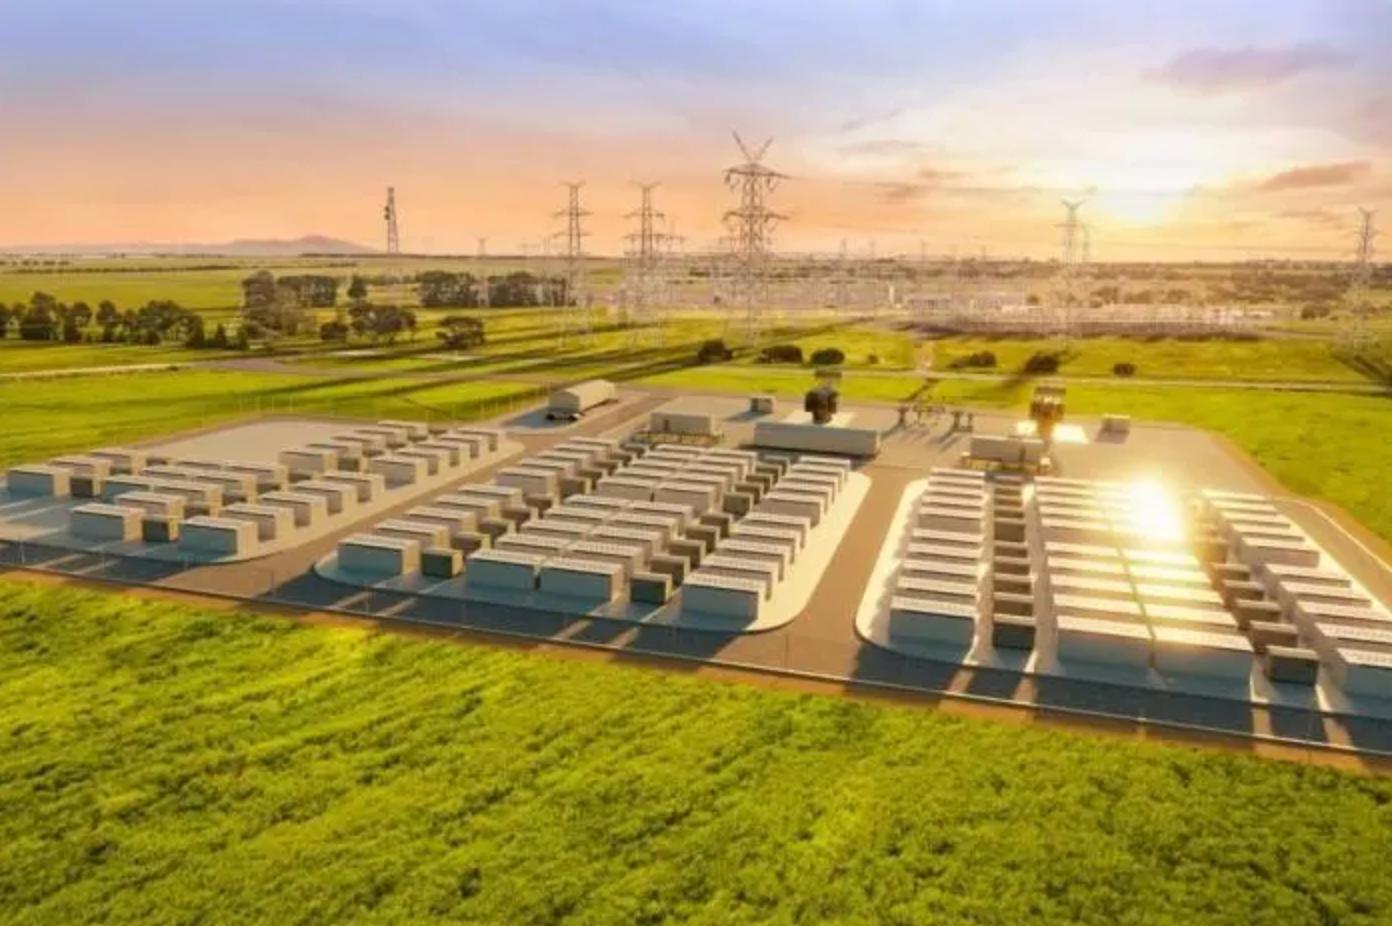 The Energy Storage Market: Two Sides of the Coin